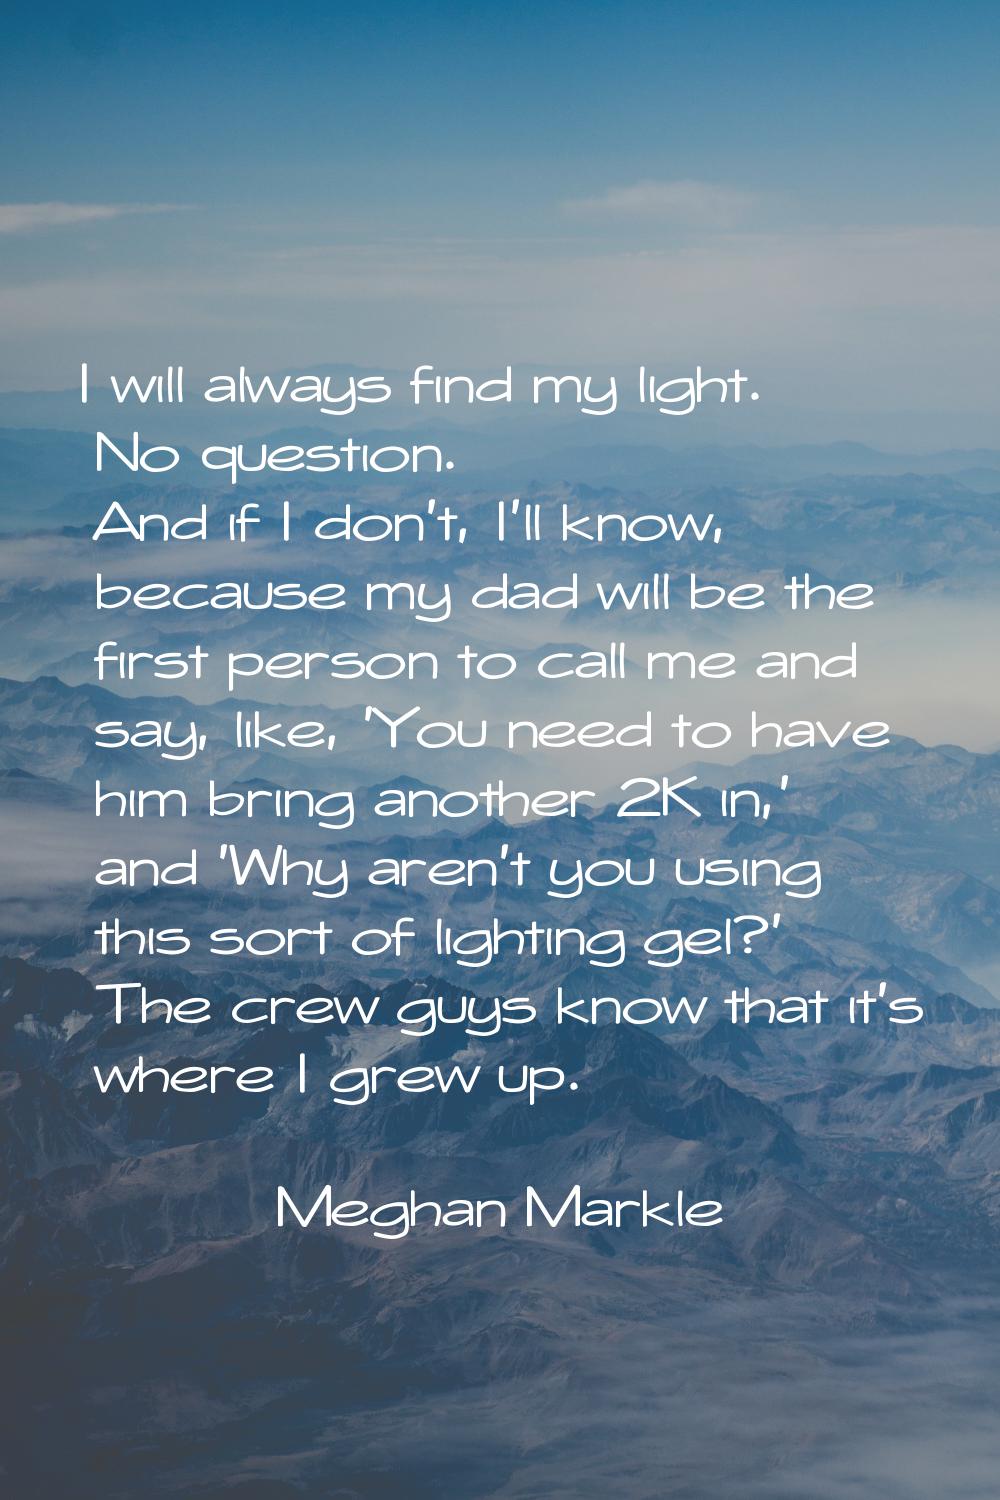 I will always find my light. No question. And if I don't, I'll know, because my dad will be the fir